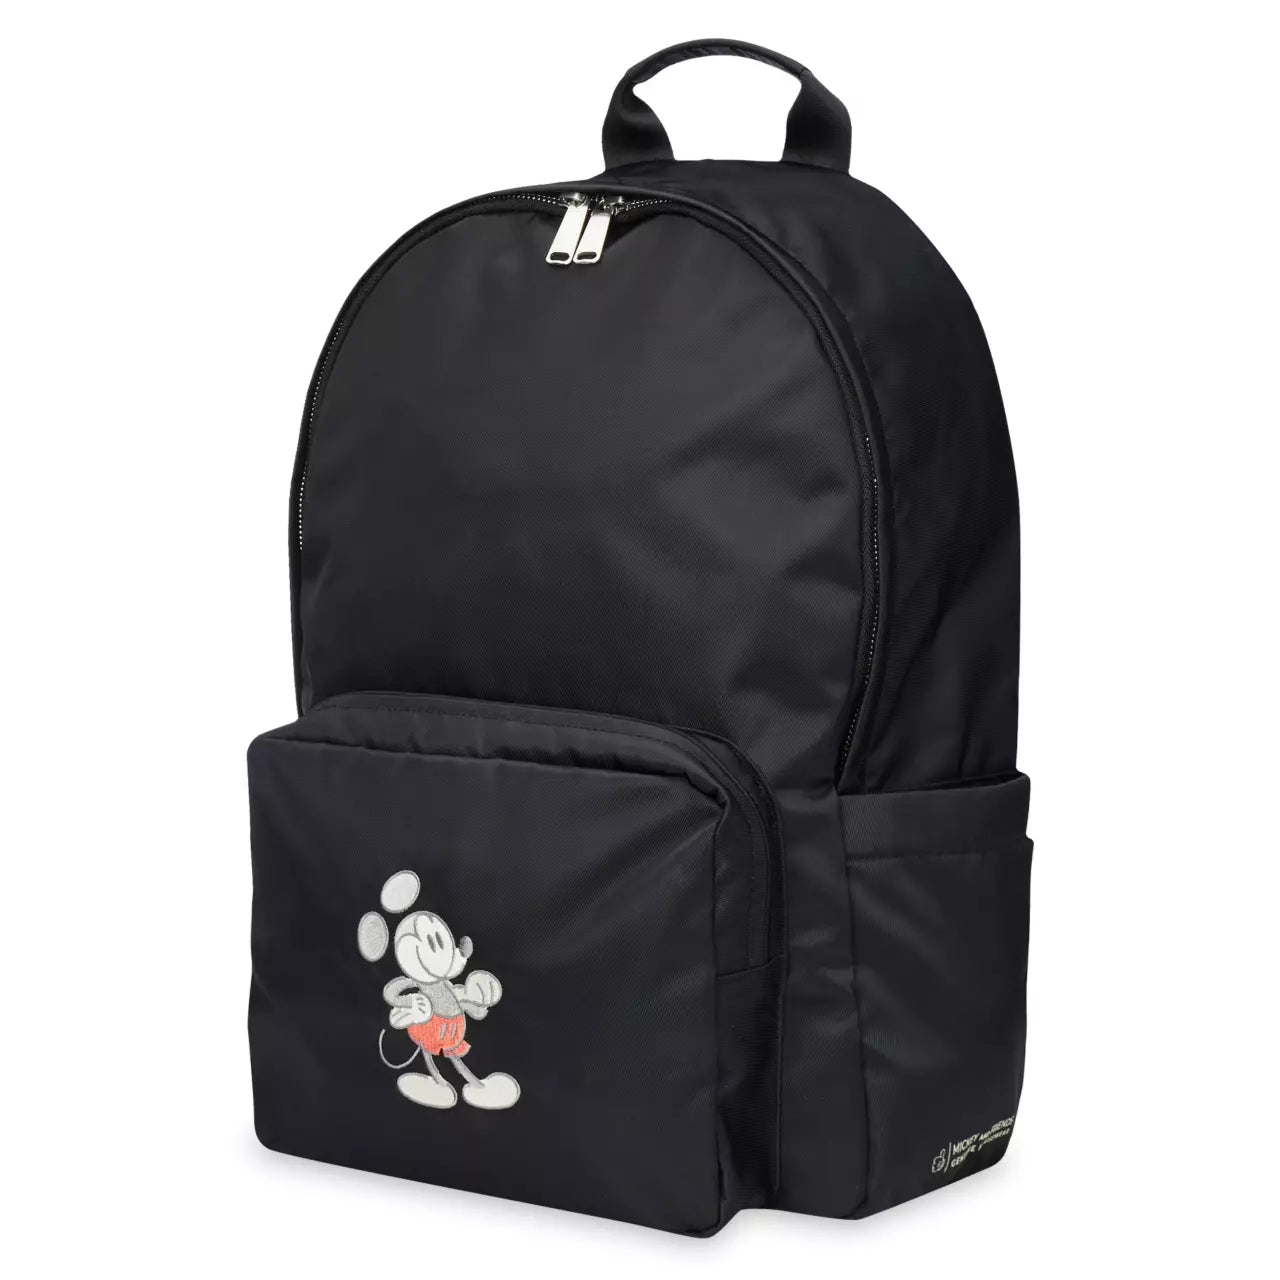 Mickey Mouse Genuine Mousewear Embroidered Backpack - BumbleToys - 14 Years & Up, 5-7 Years, 8-13 Years, Backpack, Bags, Boys, Characters, Disney, Girls, Pre-Order, School Supplies